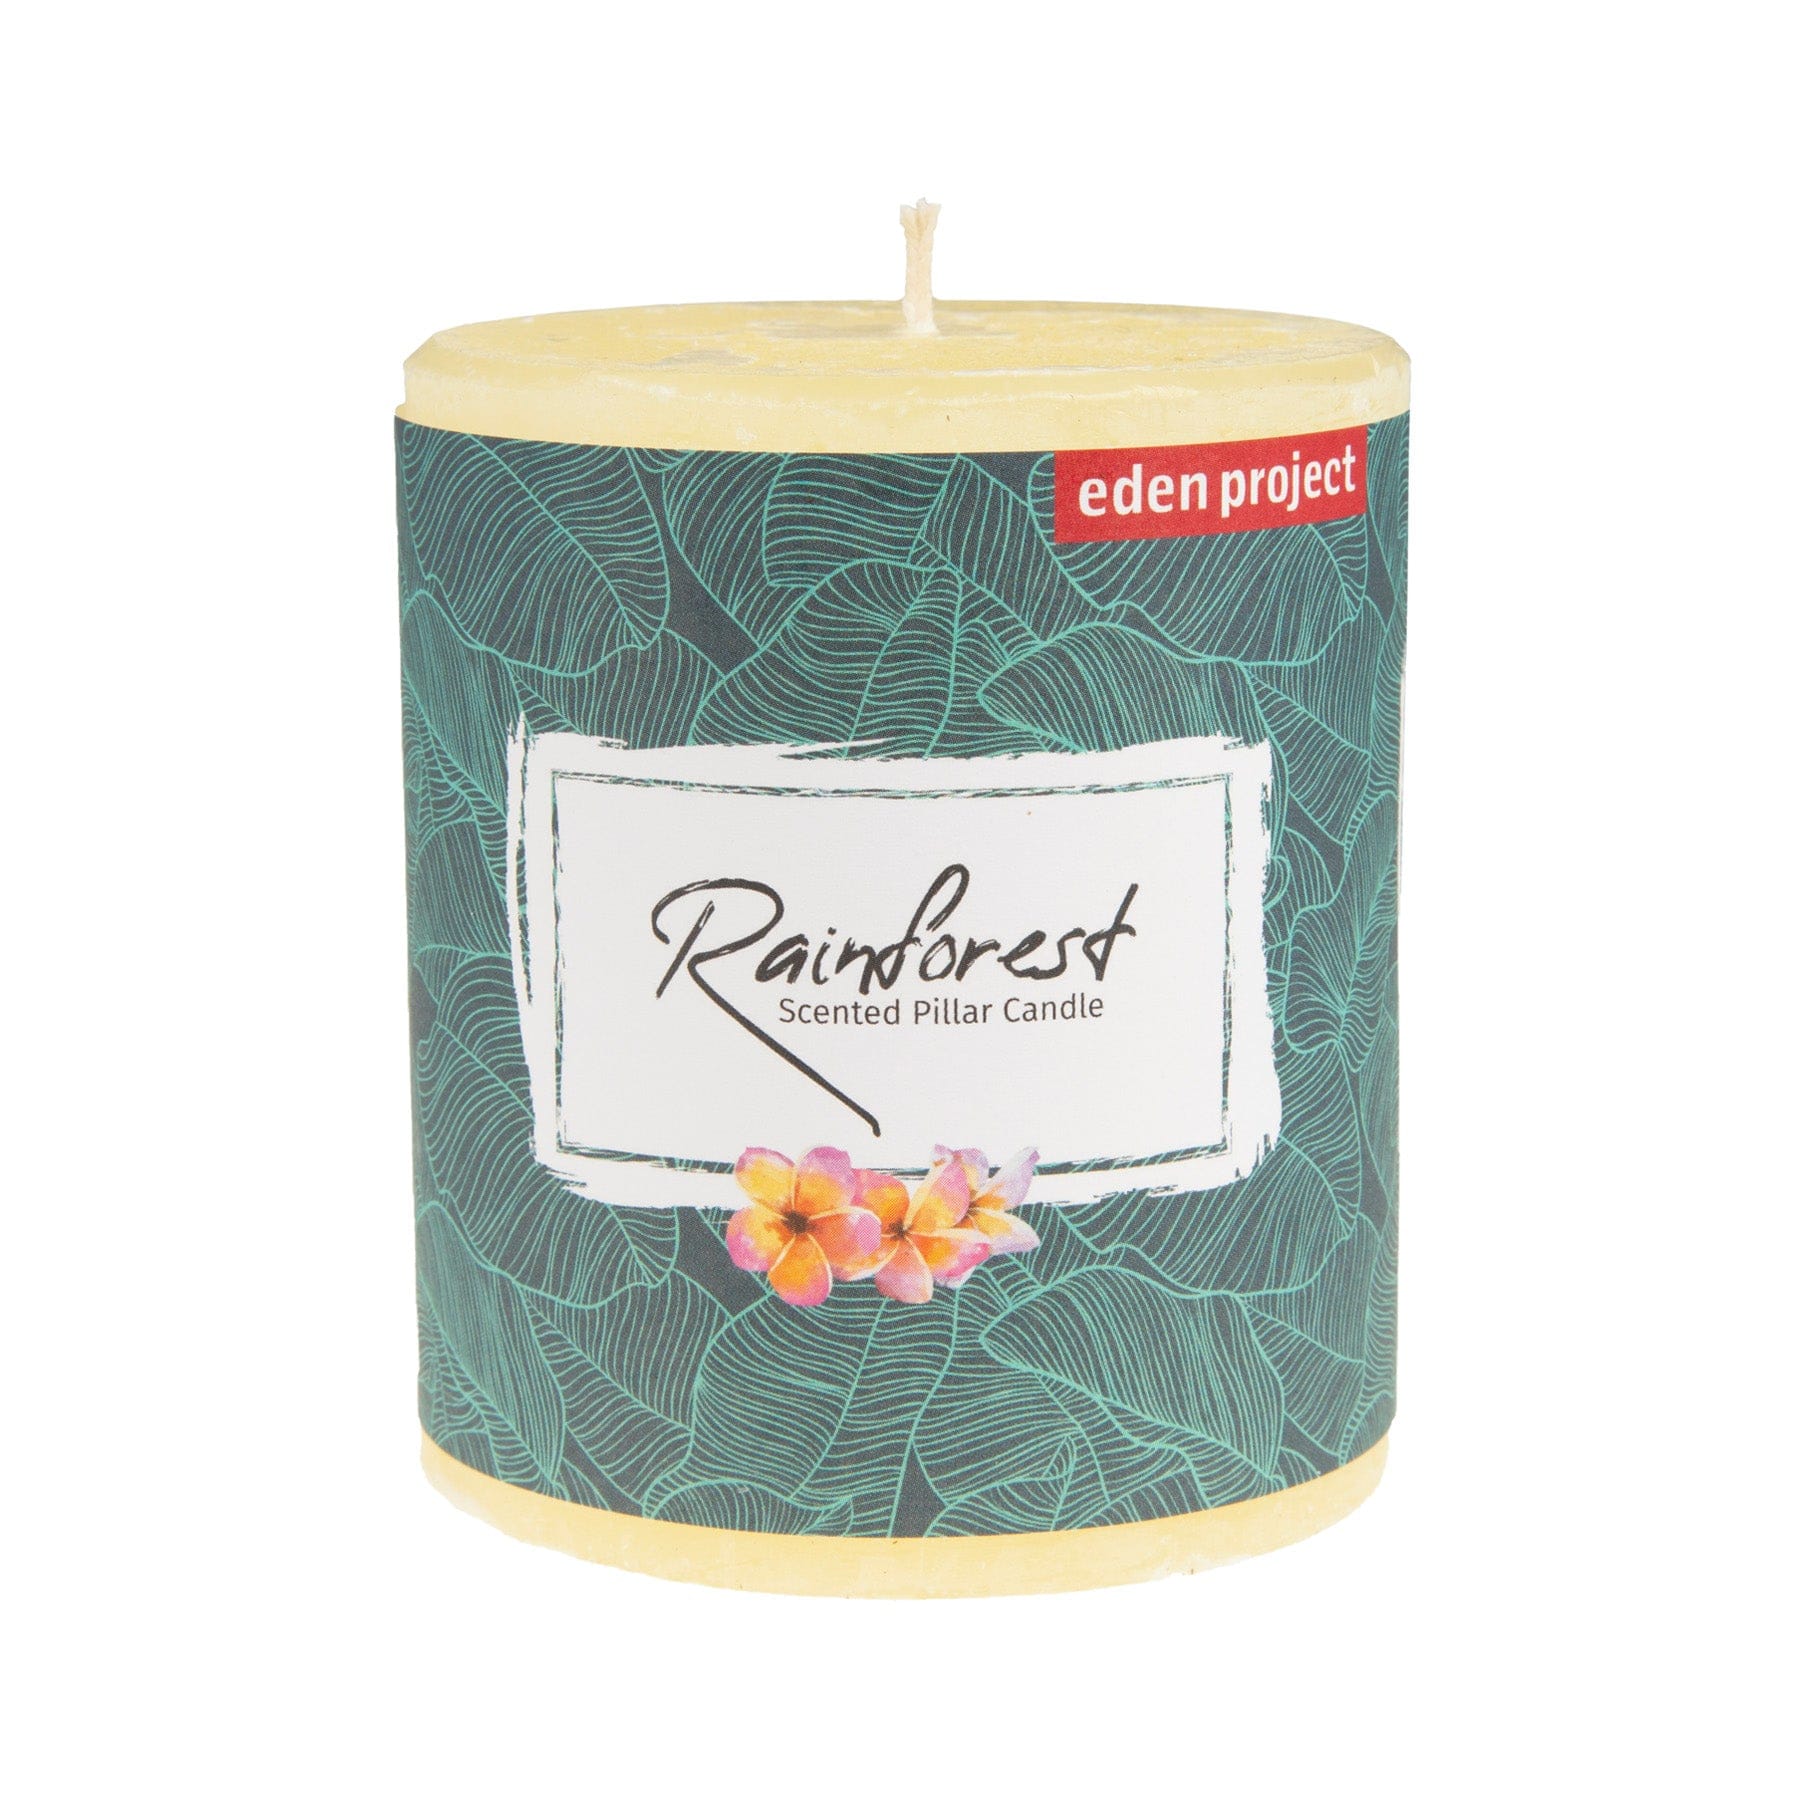 Eden Project Rainforest Scented Pillar Candle with Tropical Leaf Design and Floral Accent on Label